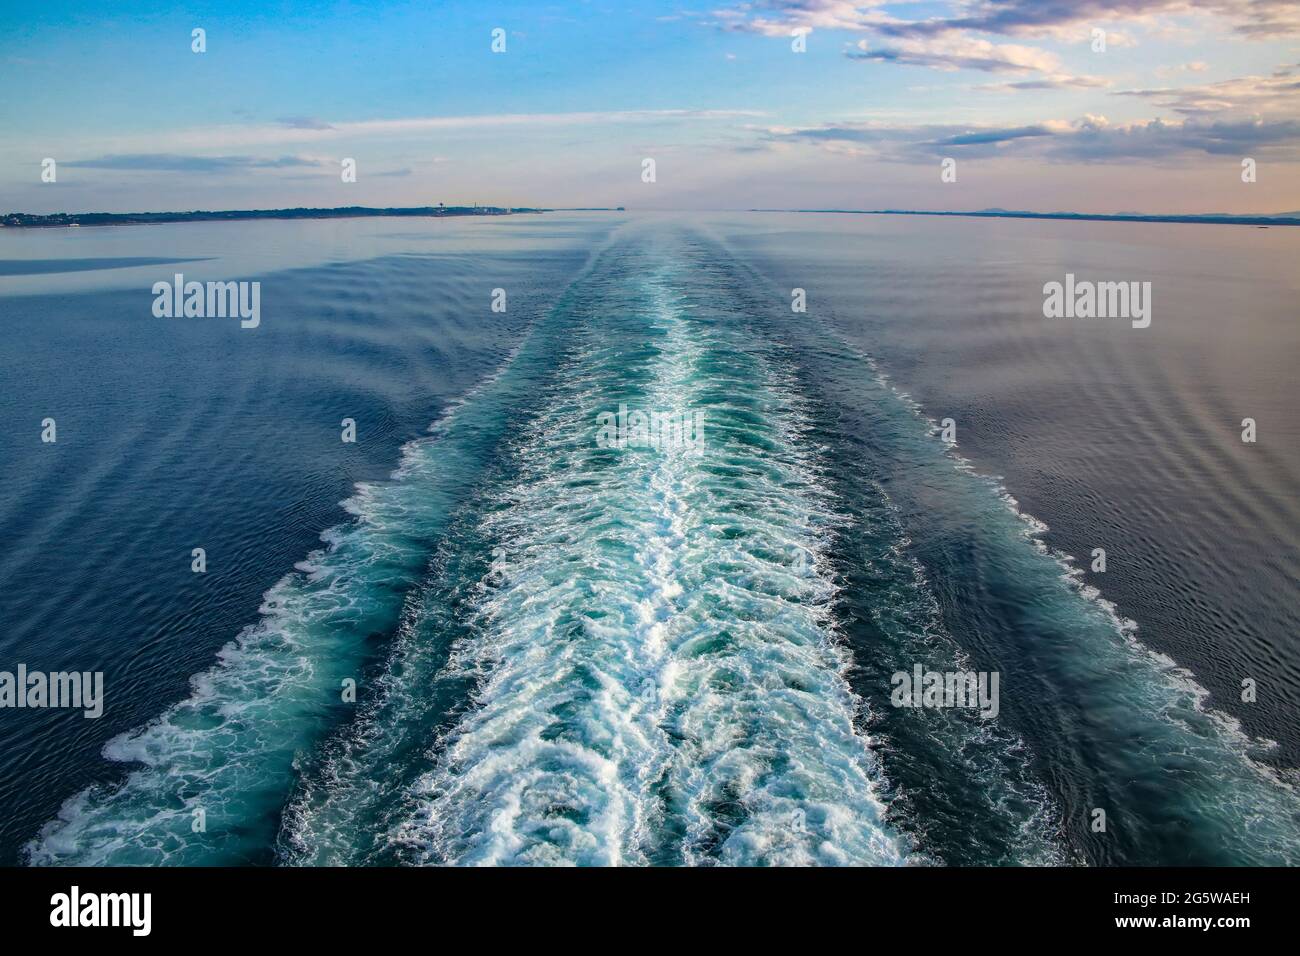 Wake of a ship across Ocean while sailing the Baltic, on a beautiful day. Purple and blue light reflecting on the sea and waves. Stock Photo